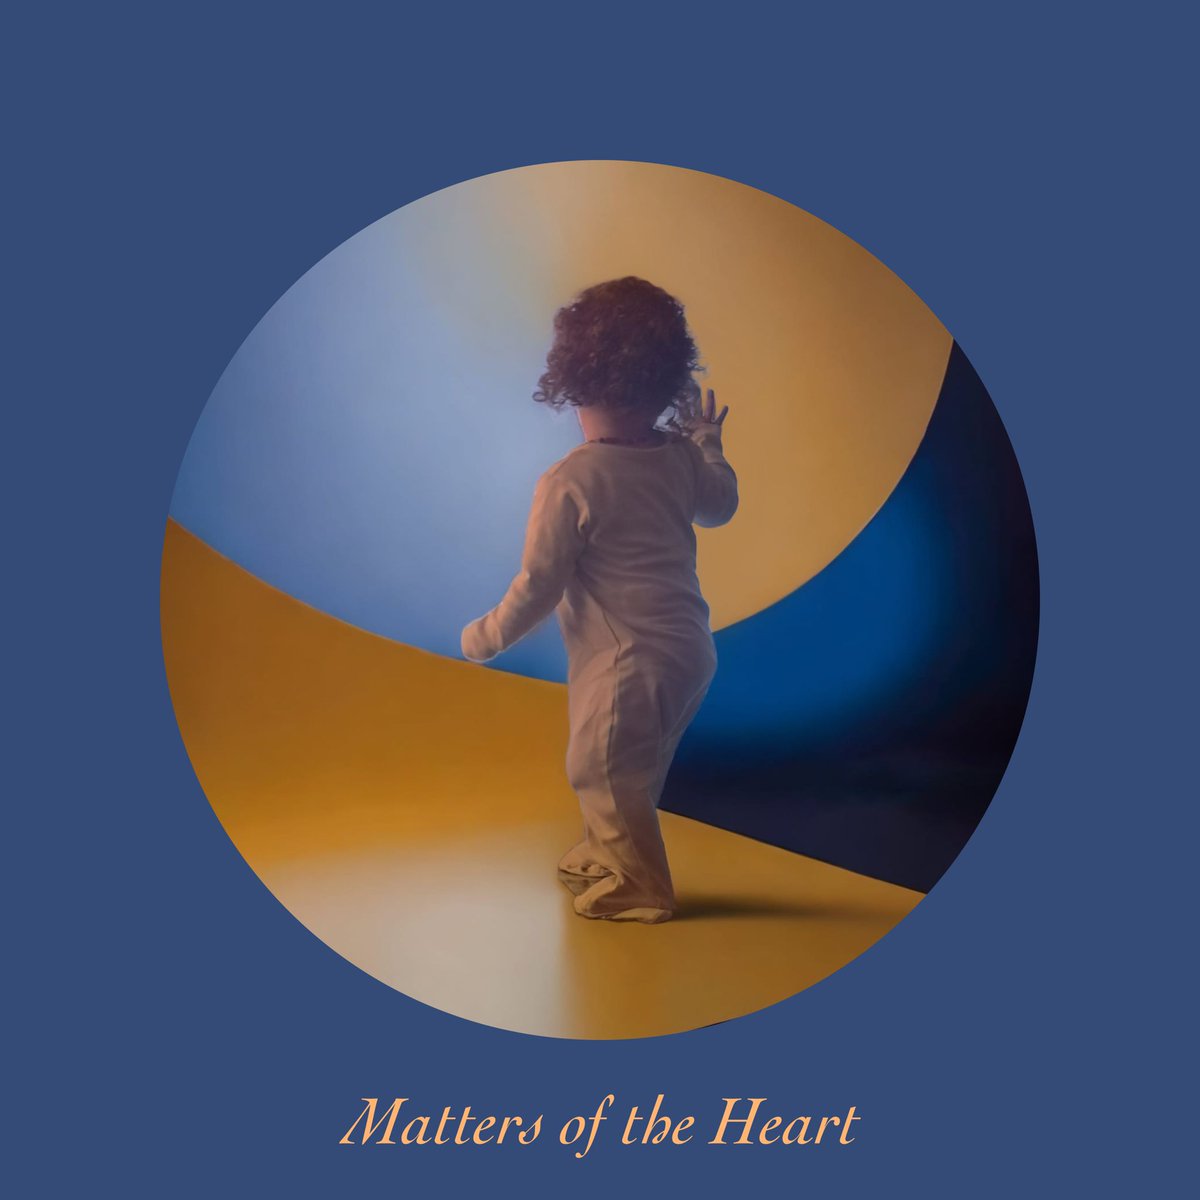 Finally my 2nd album is ready...emails sent to DJs and lots of wonderful responses already. Every spin is very much appreciated. @paulmcdevitts @JimmystaffordDJ @blaireve @Brian_Lally @highlandradio @RTERadio1 @bbcradioulster ❤️ #mattersoftheheart